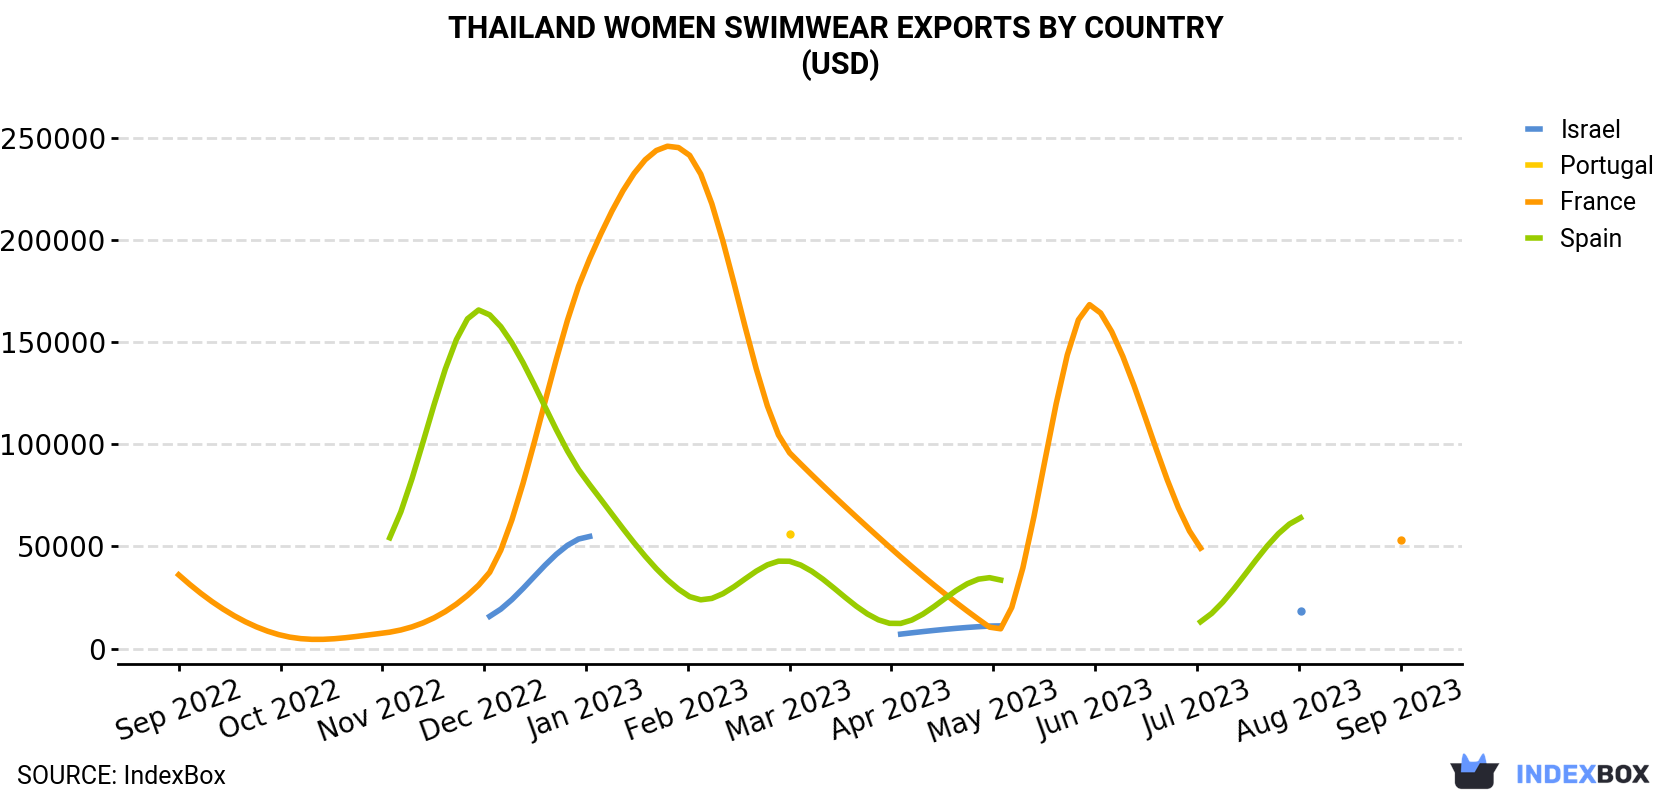 Thailand Women Swimwear Exports By Country (USD)